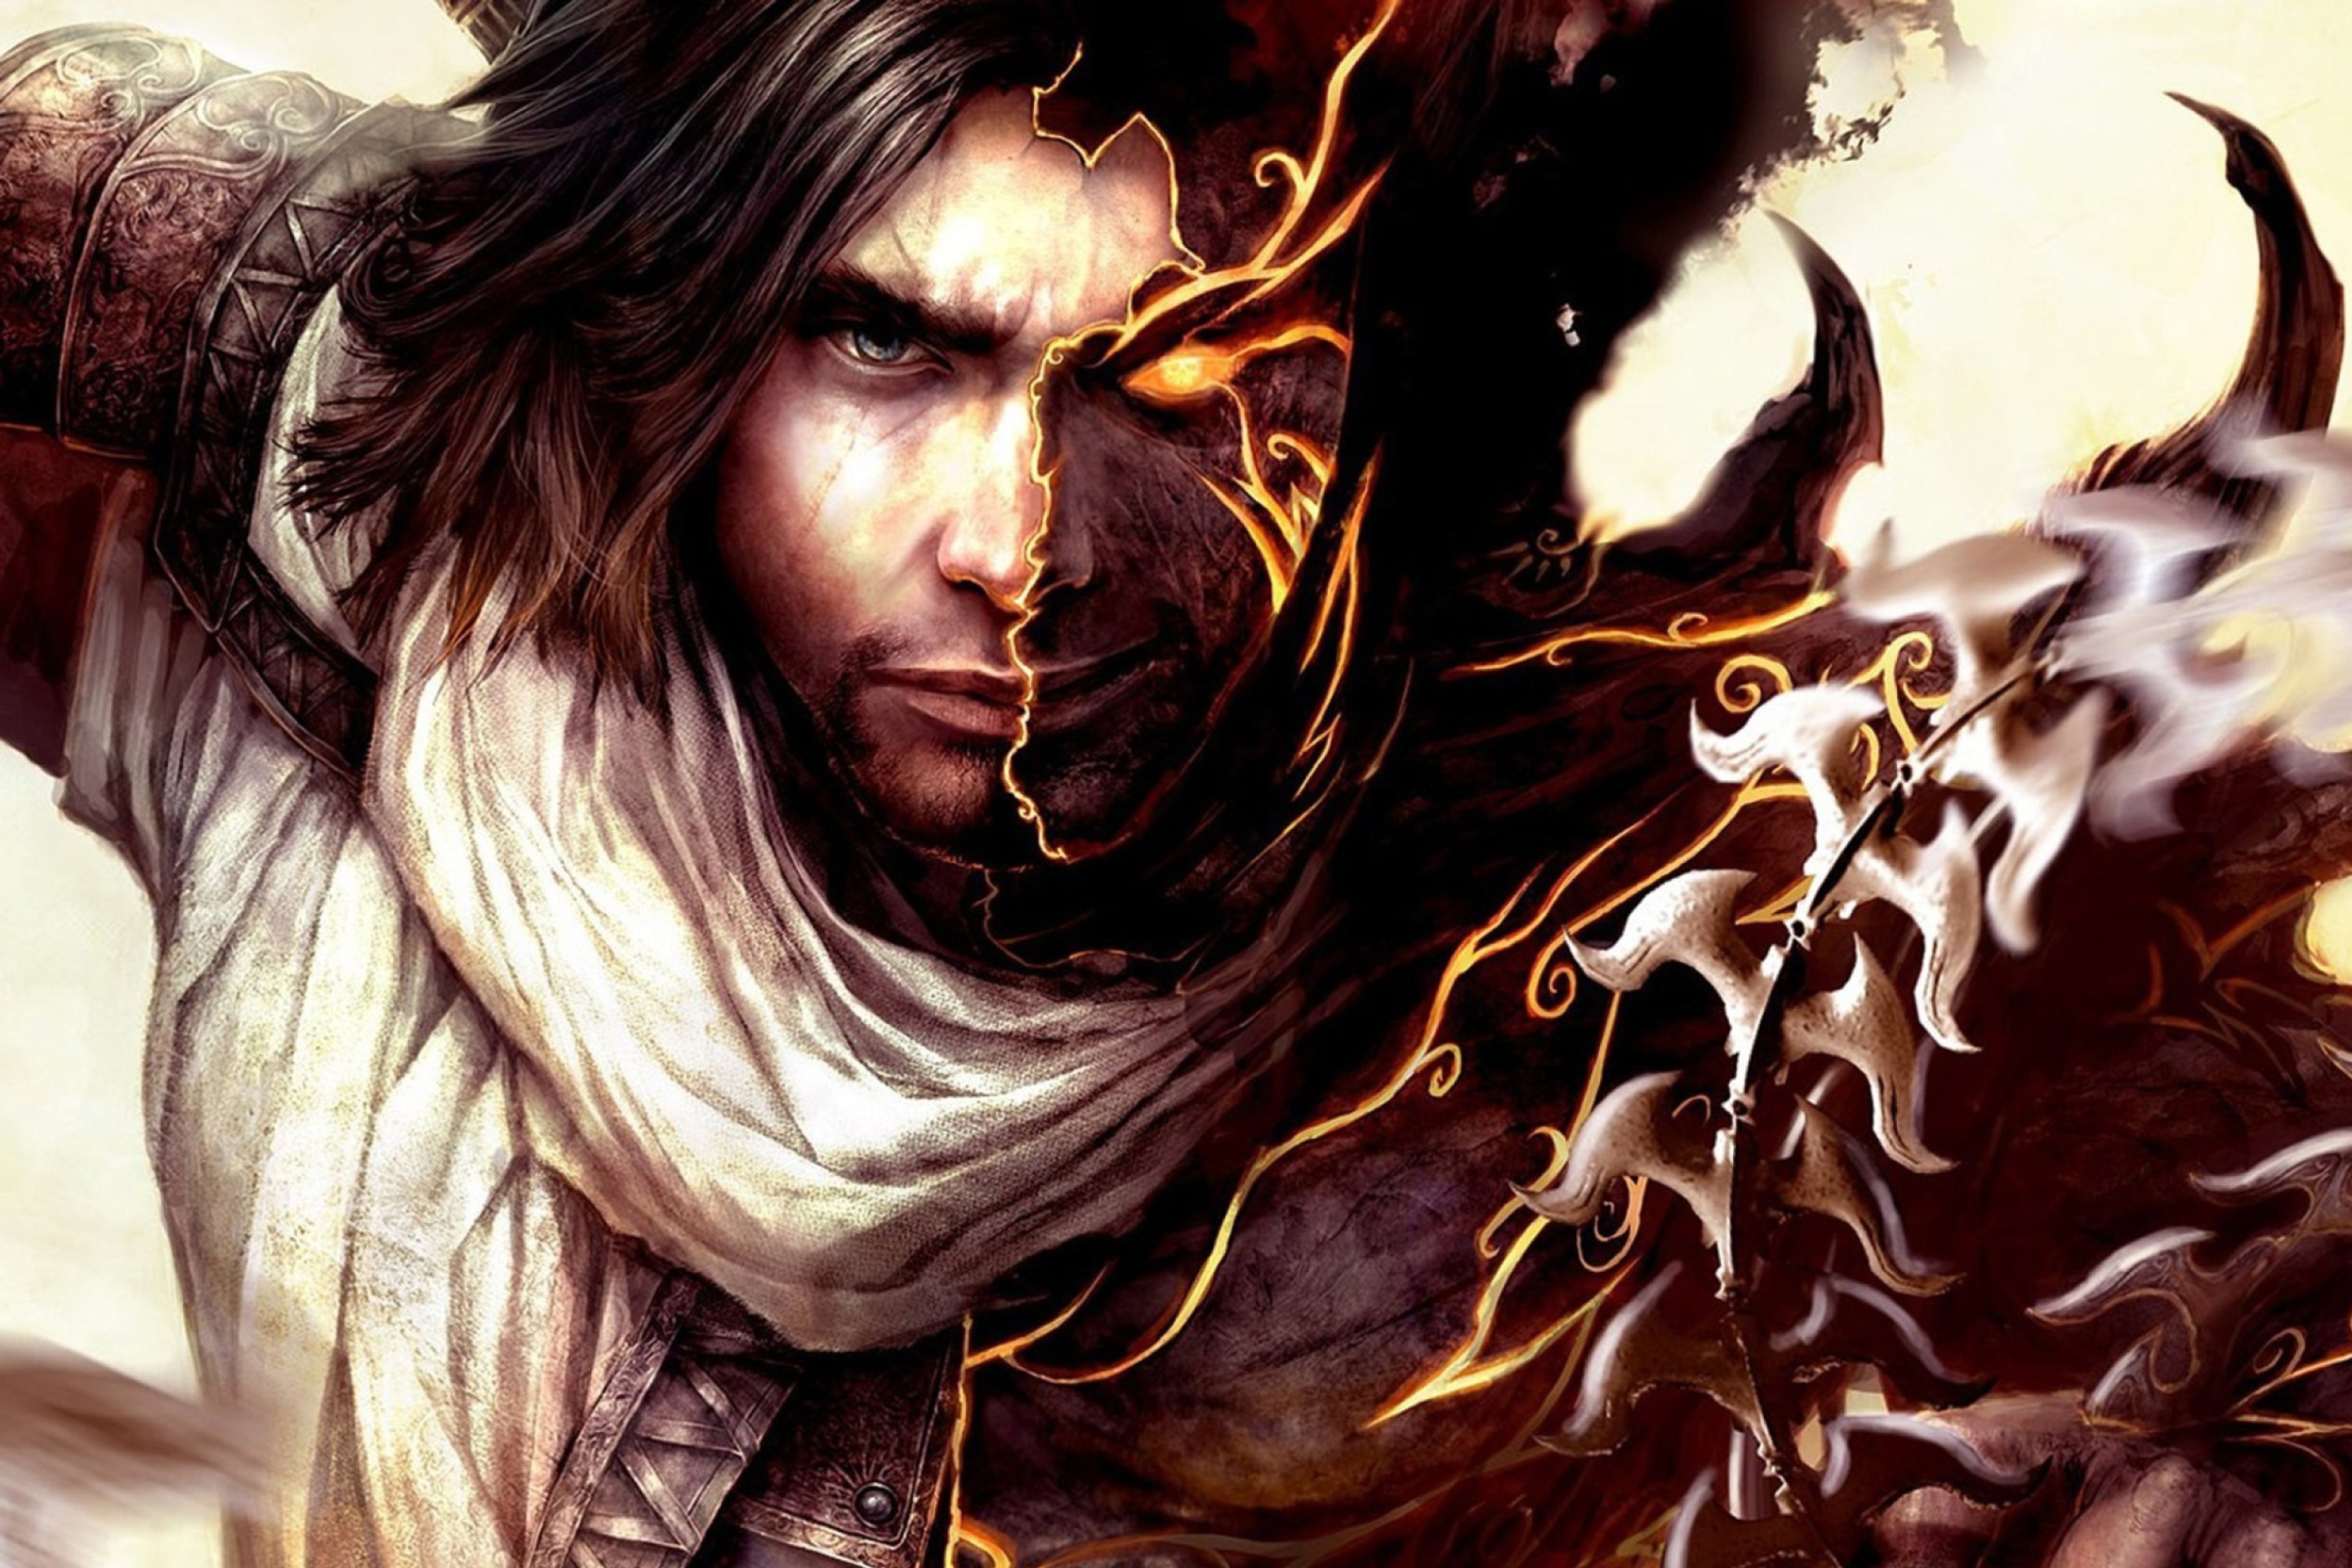 Prince Of Persia - The Two Thrones screenshot #1 2880x1920